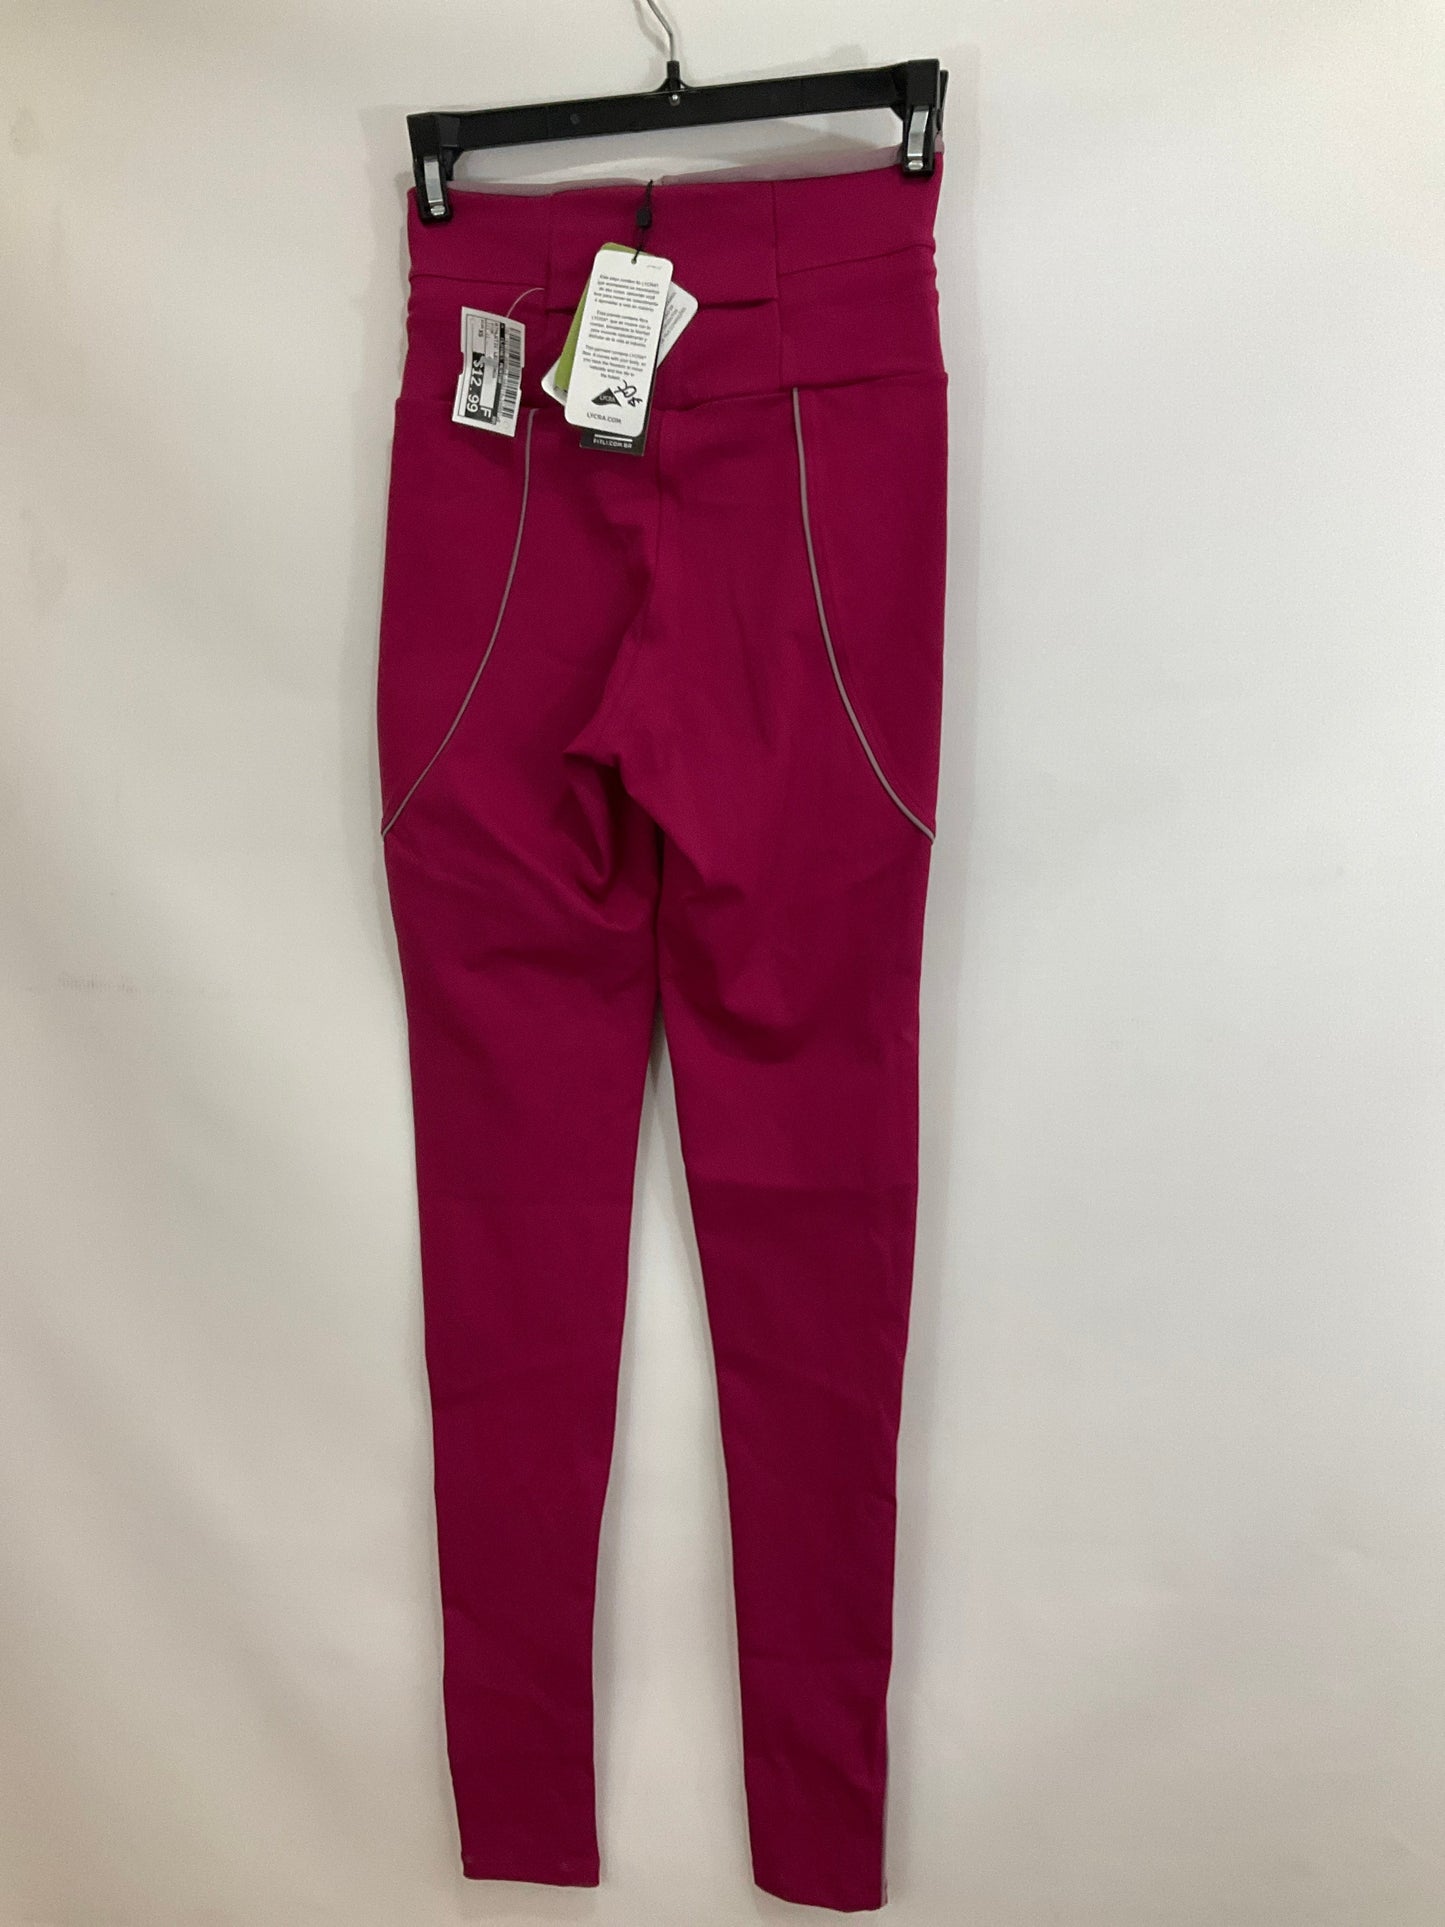 Pink Athletic Leggings Clothes Mentor, Size Xs